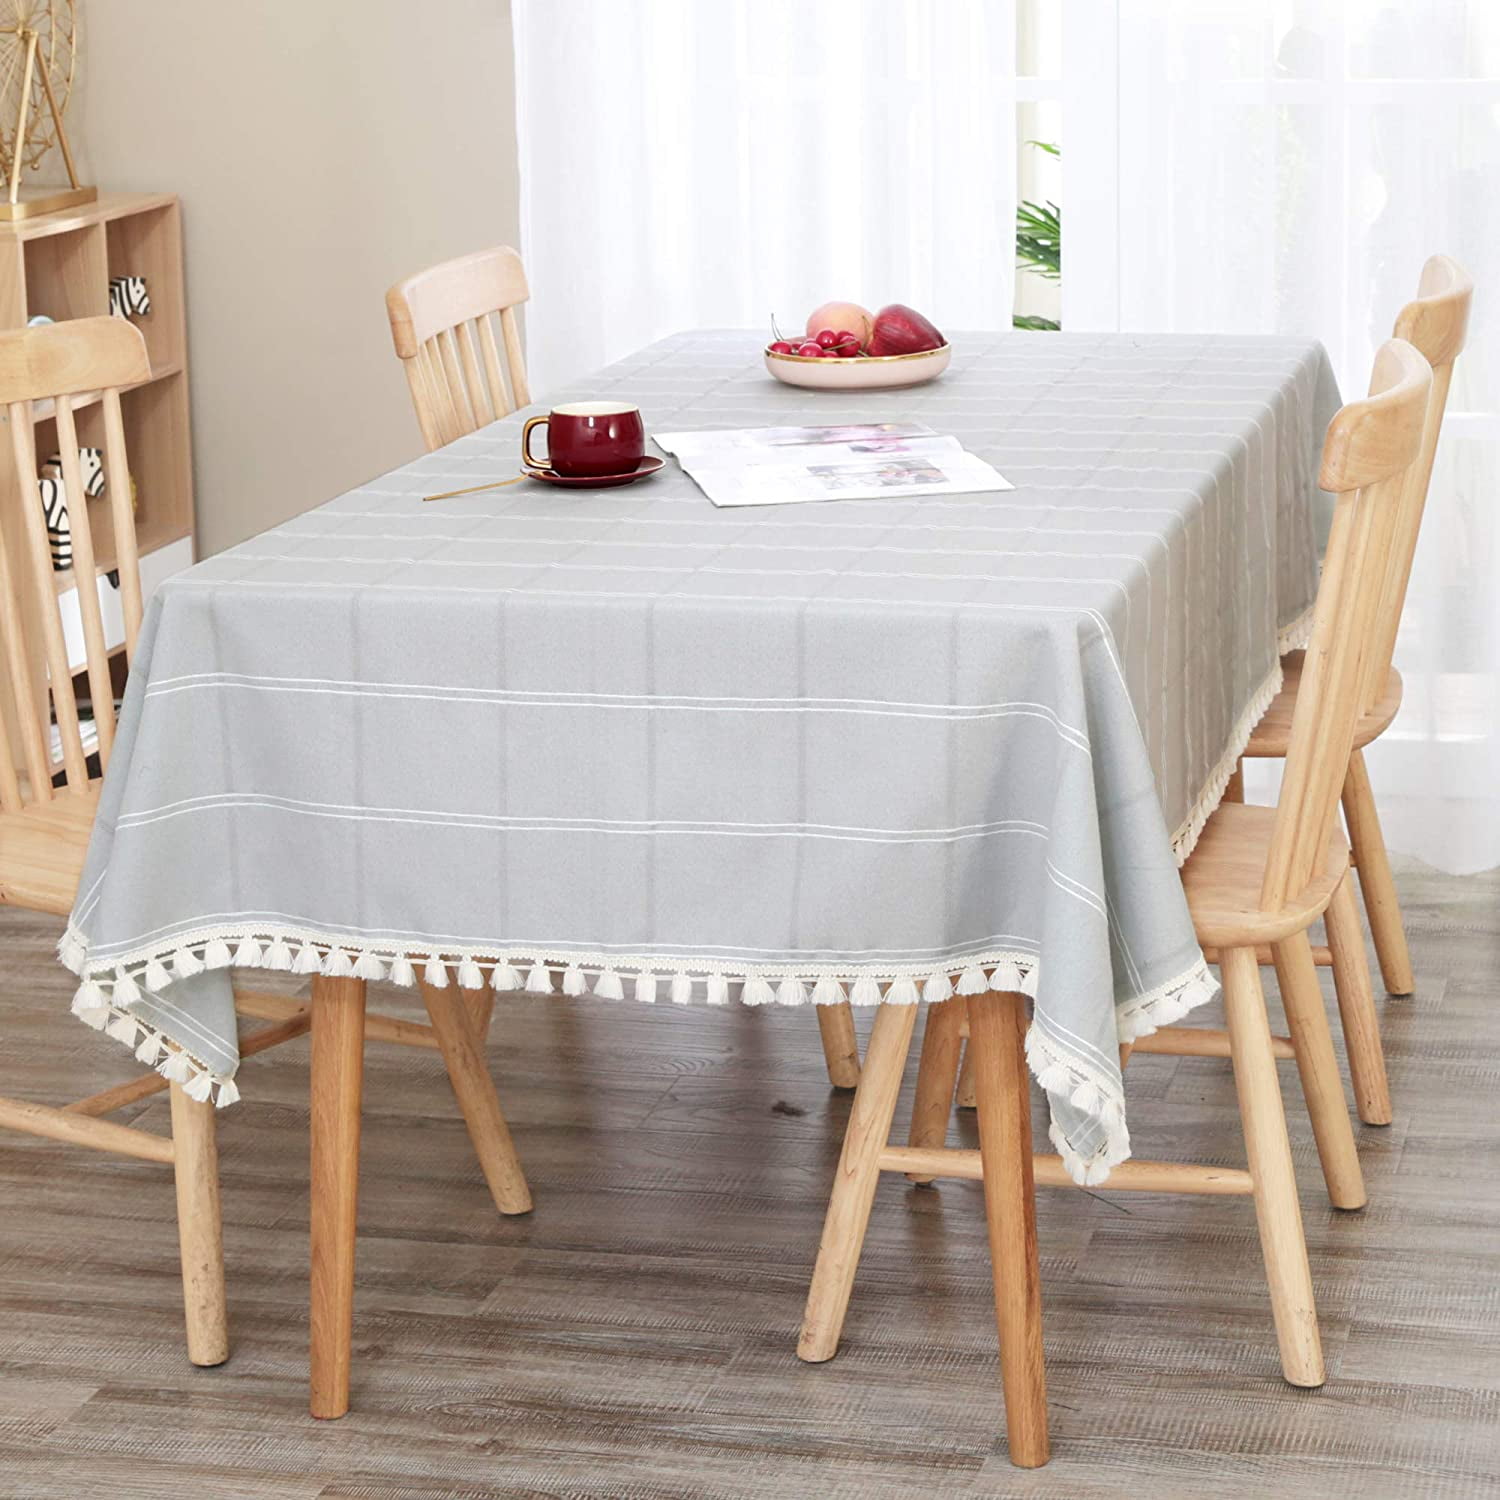 Shining Stars Wrinkle Free Anti-Fading Spill Proof Table Cover for Kitchen Dinning 54×72 in Colorful Stars Tablecloths for Party